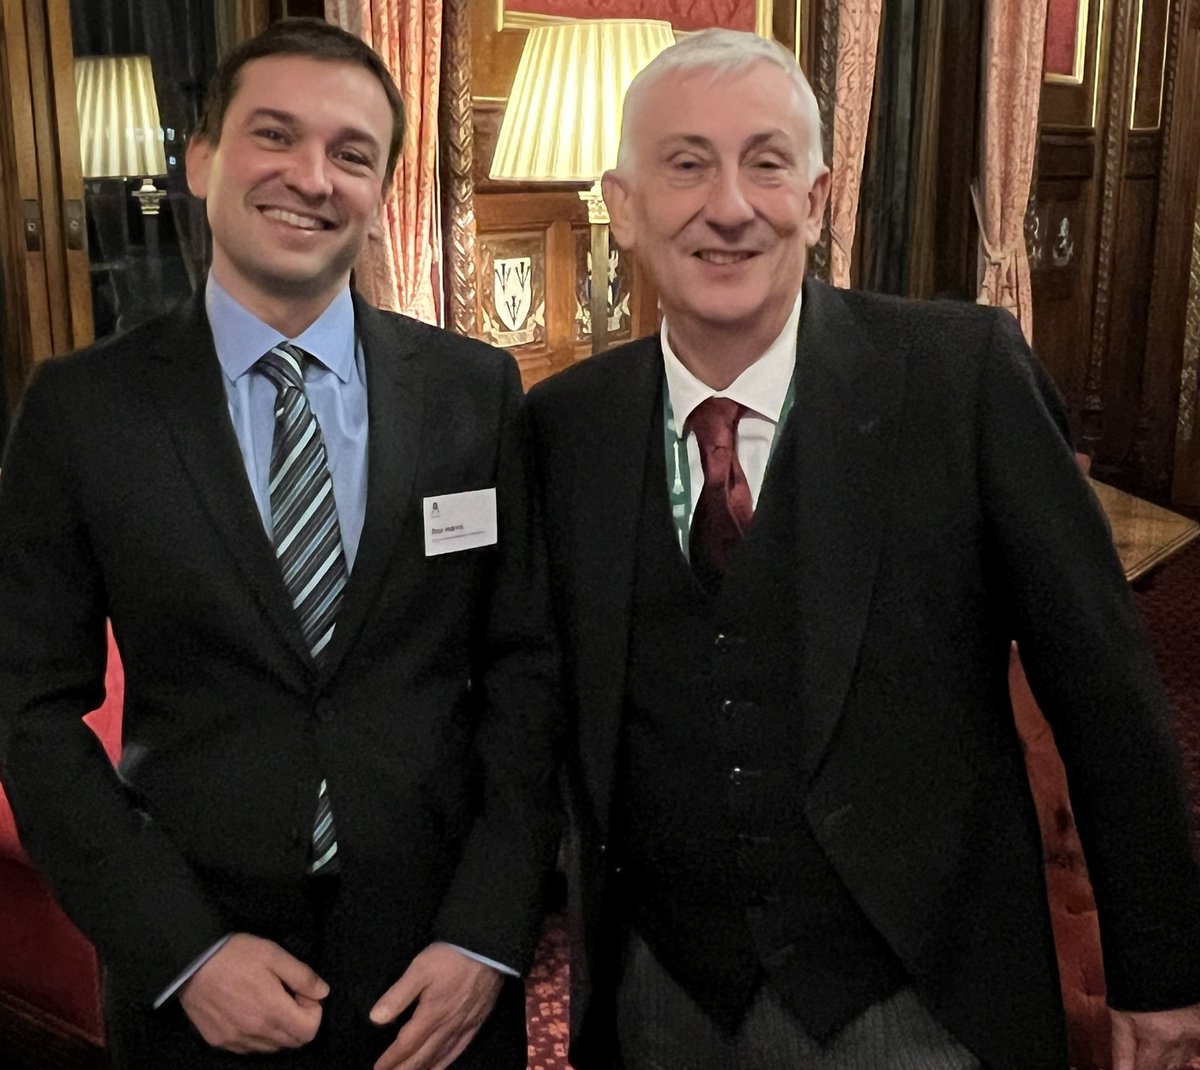 I met with @LindsayHoyle_MP  (@CommonsSpeaker), the Speaker of the House of Commons, tonight and was thrilled with the level of cross party support for #NeurodiversityInBusiness (@NDinBusiness). Working across the political spectrum, collaboratively we can change the ND world!